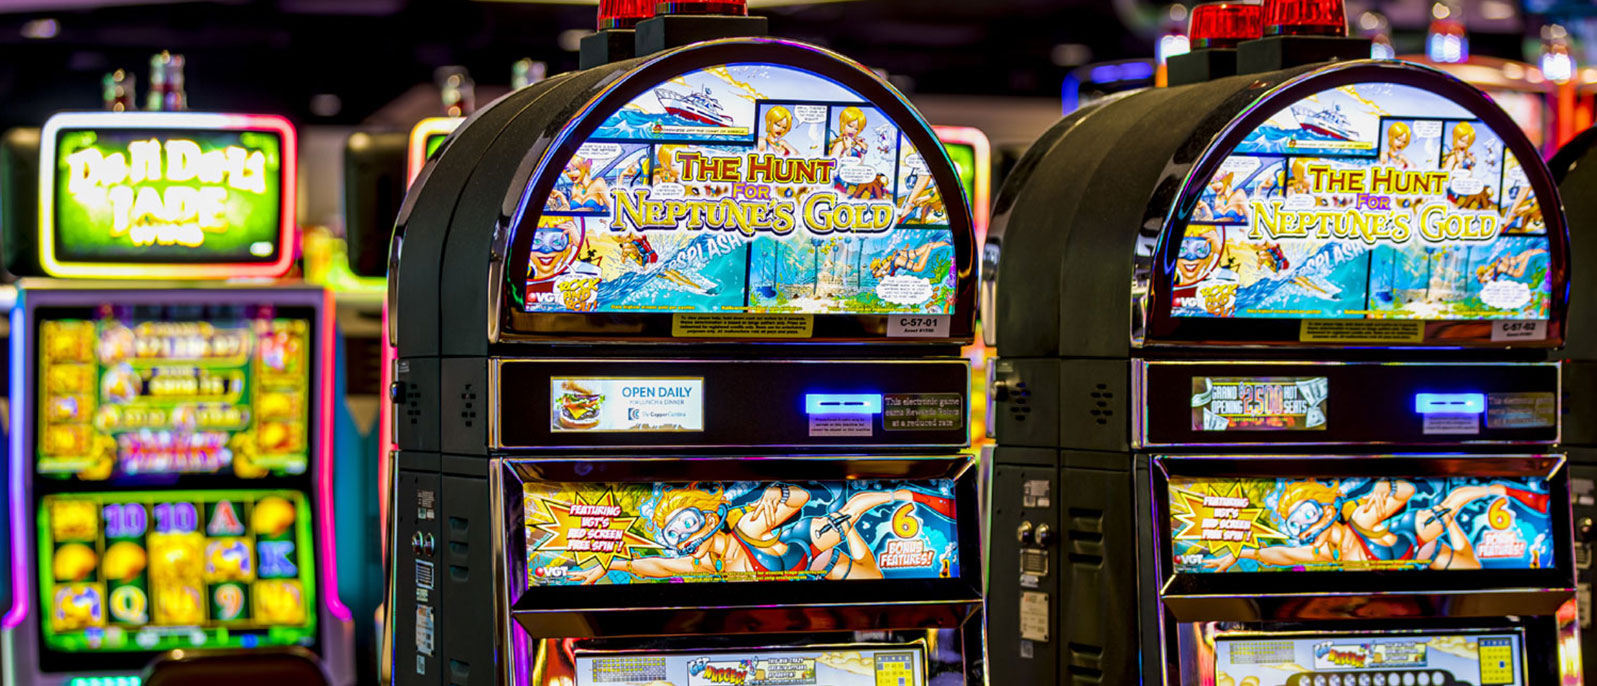 The Hunt for Neptunes Gold electronic game at Guymon, Oklahoma casino.